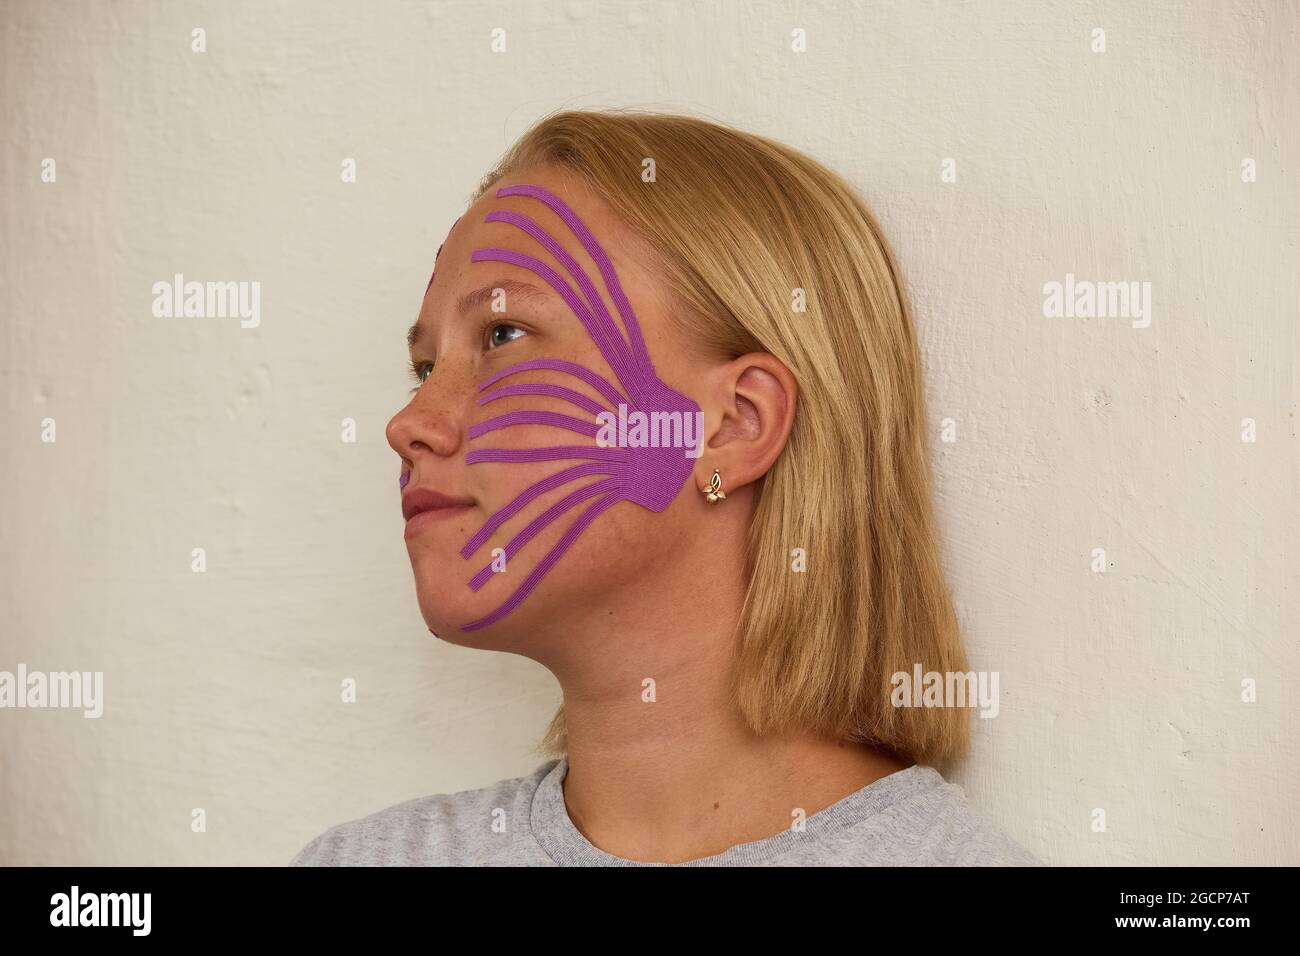 Girl's face in profile with kinesiological tapes for cheeks Stock Photo